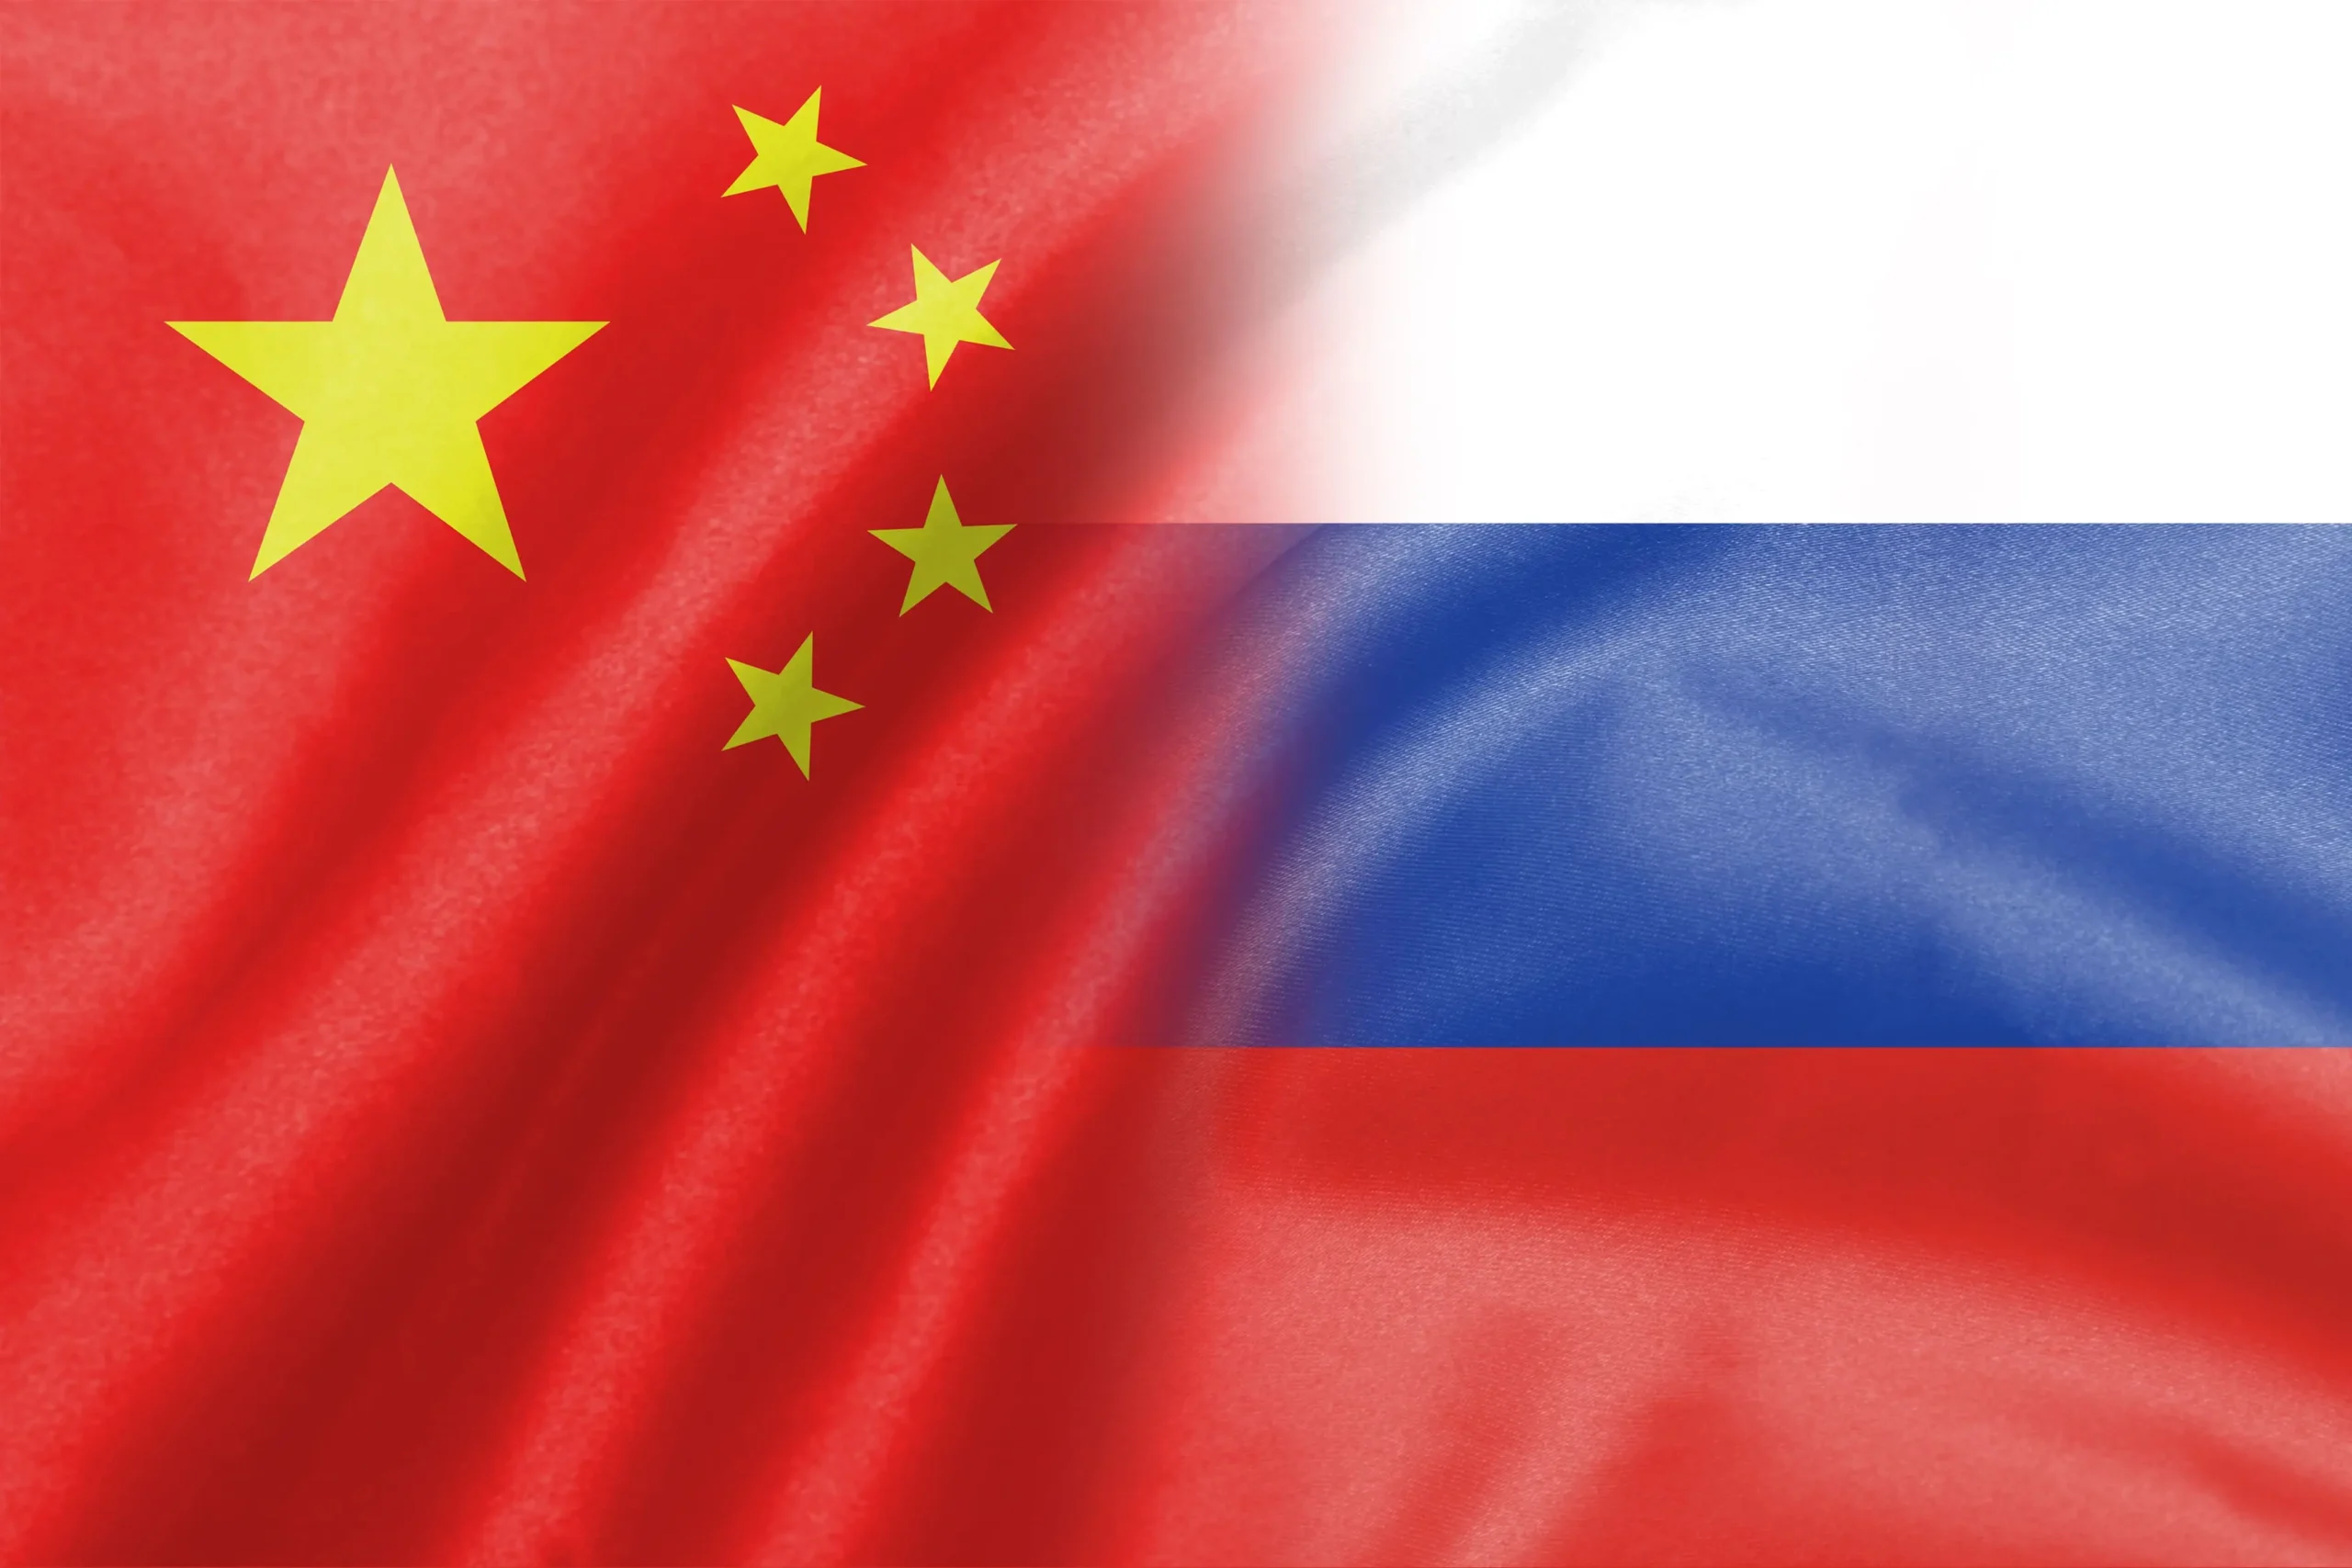 China’s Major Banks React to Western Sanctions on Russia